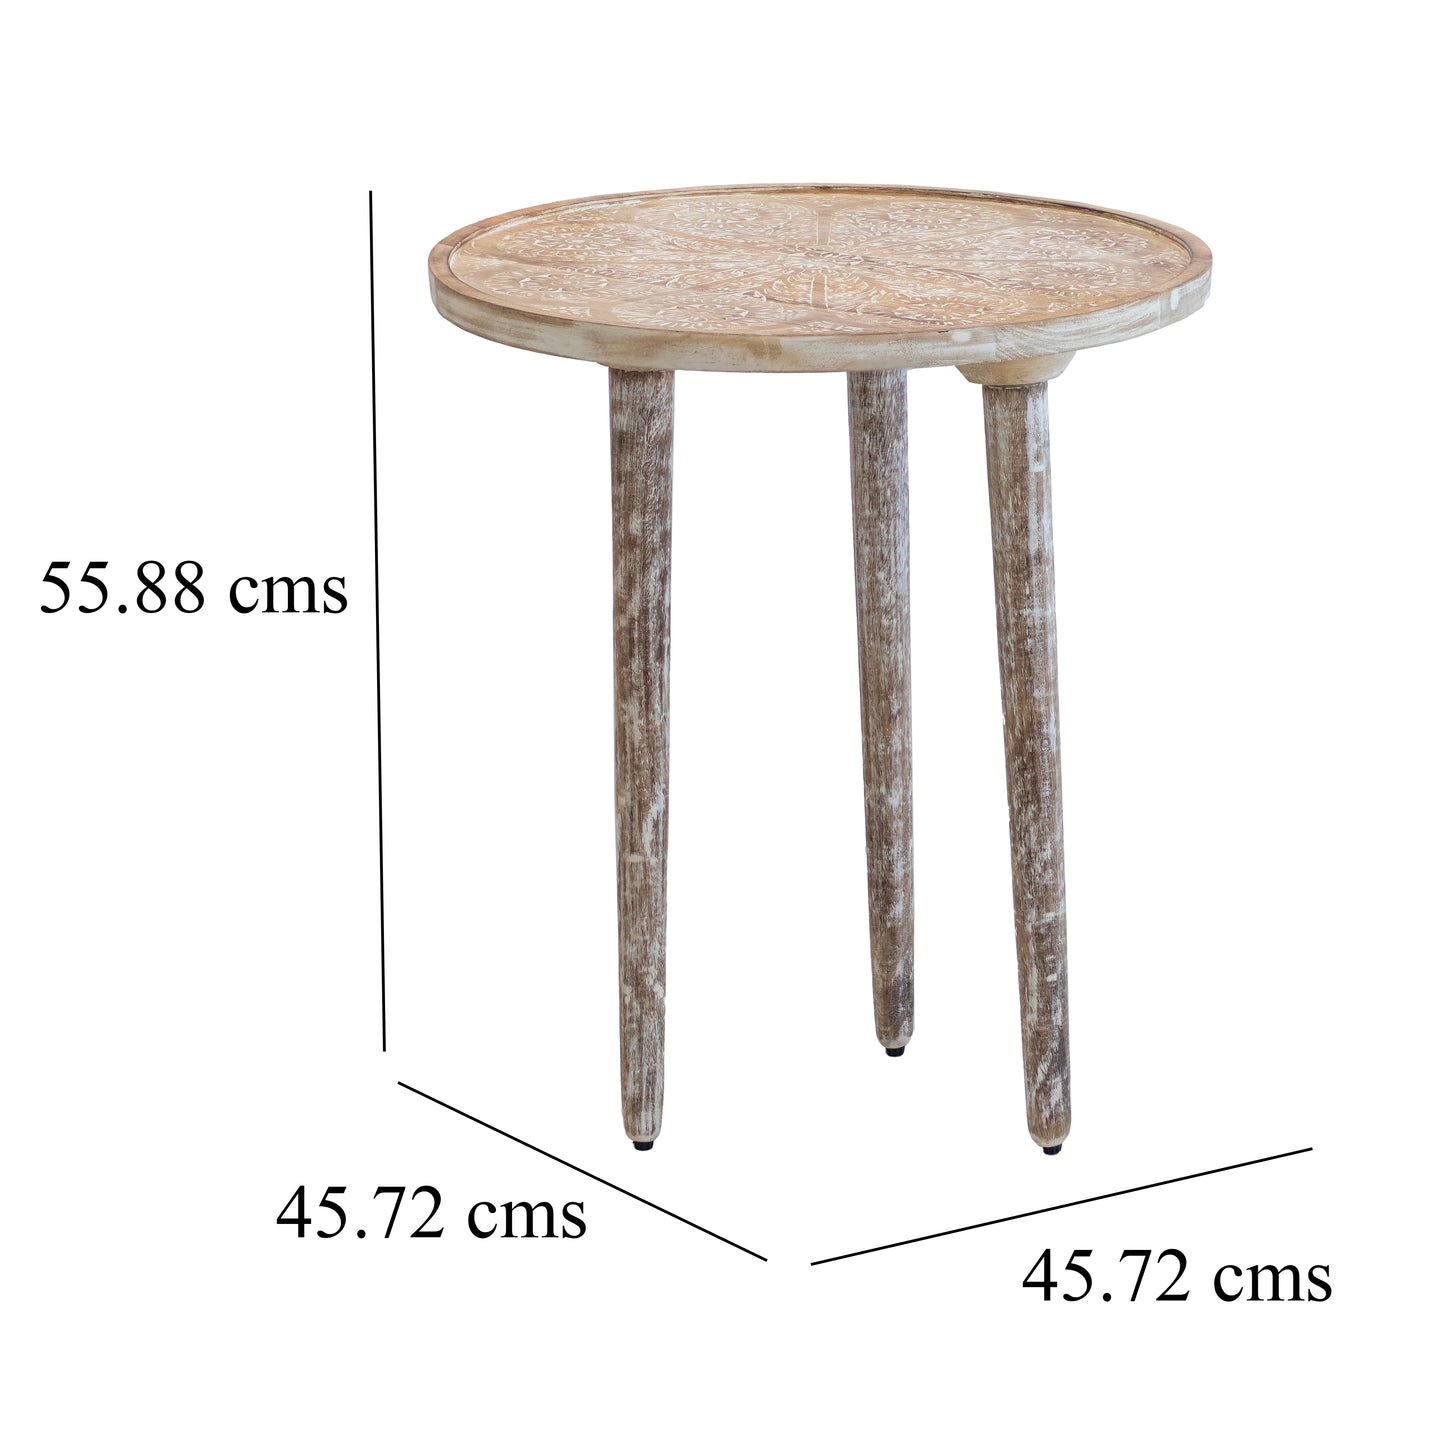 Kezevel Wooden Decorative Accent Table - Round Brown White Handcrafted Vintage End Table, Bedside Table, Side Stand, Size 45.72X45.72X55.88 CM